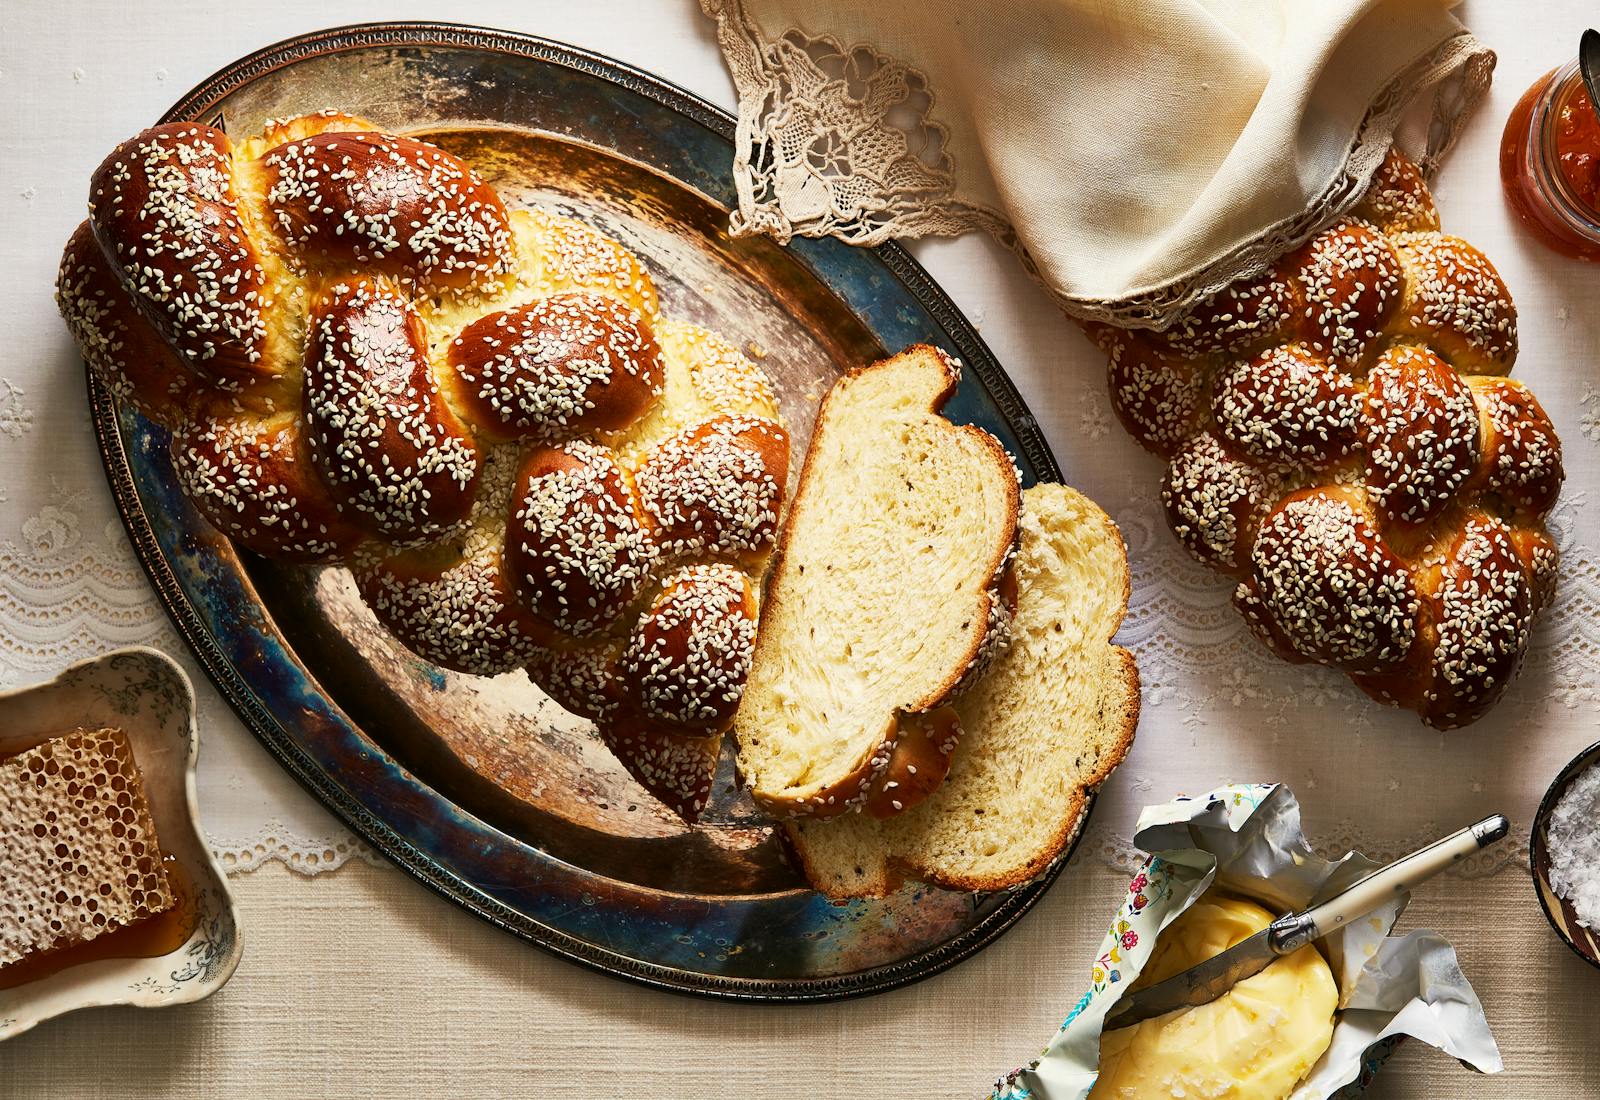 Anise seed challah with two slices on serving platter.